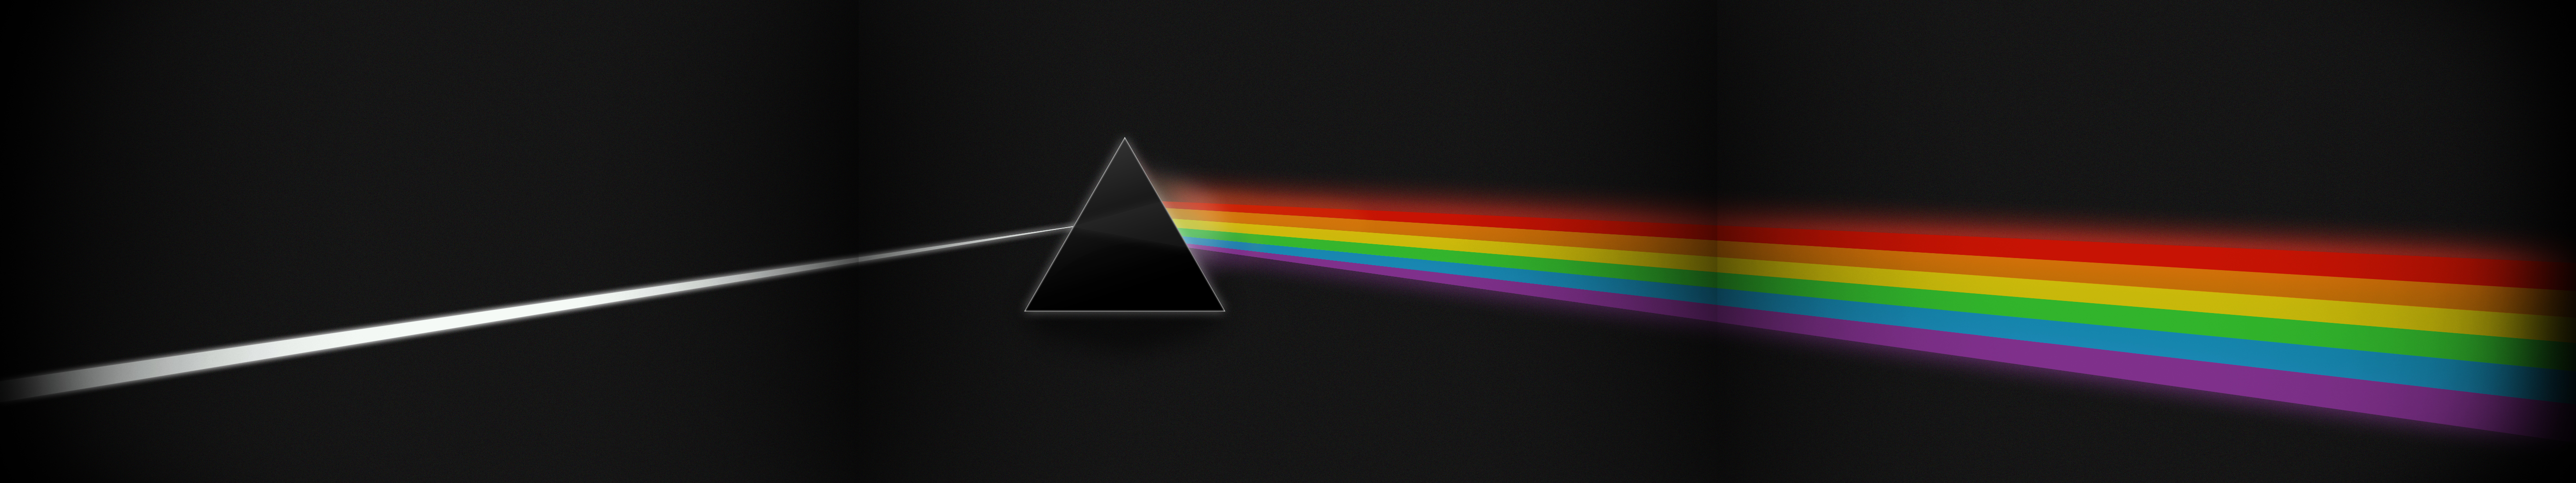 Dark Side Of The Moon Triple Monitor Wallpaper By Dosycool On